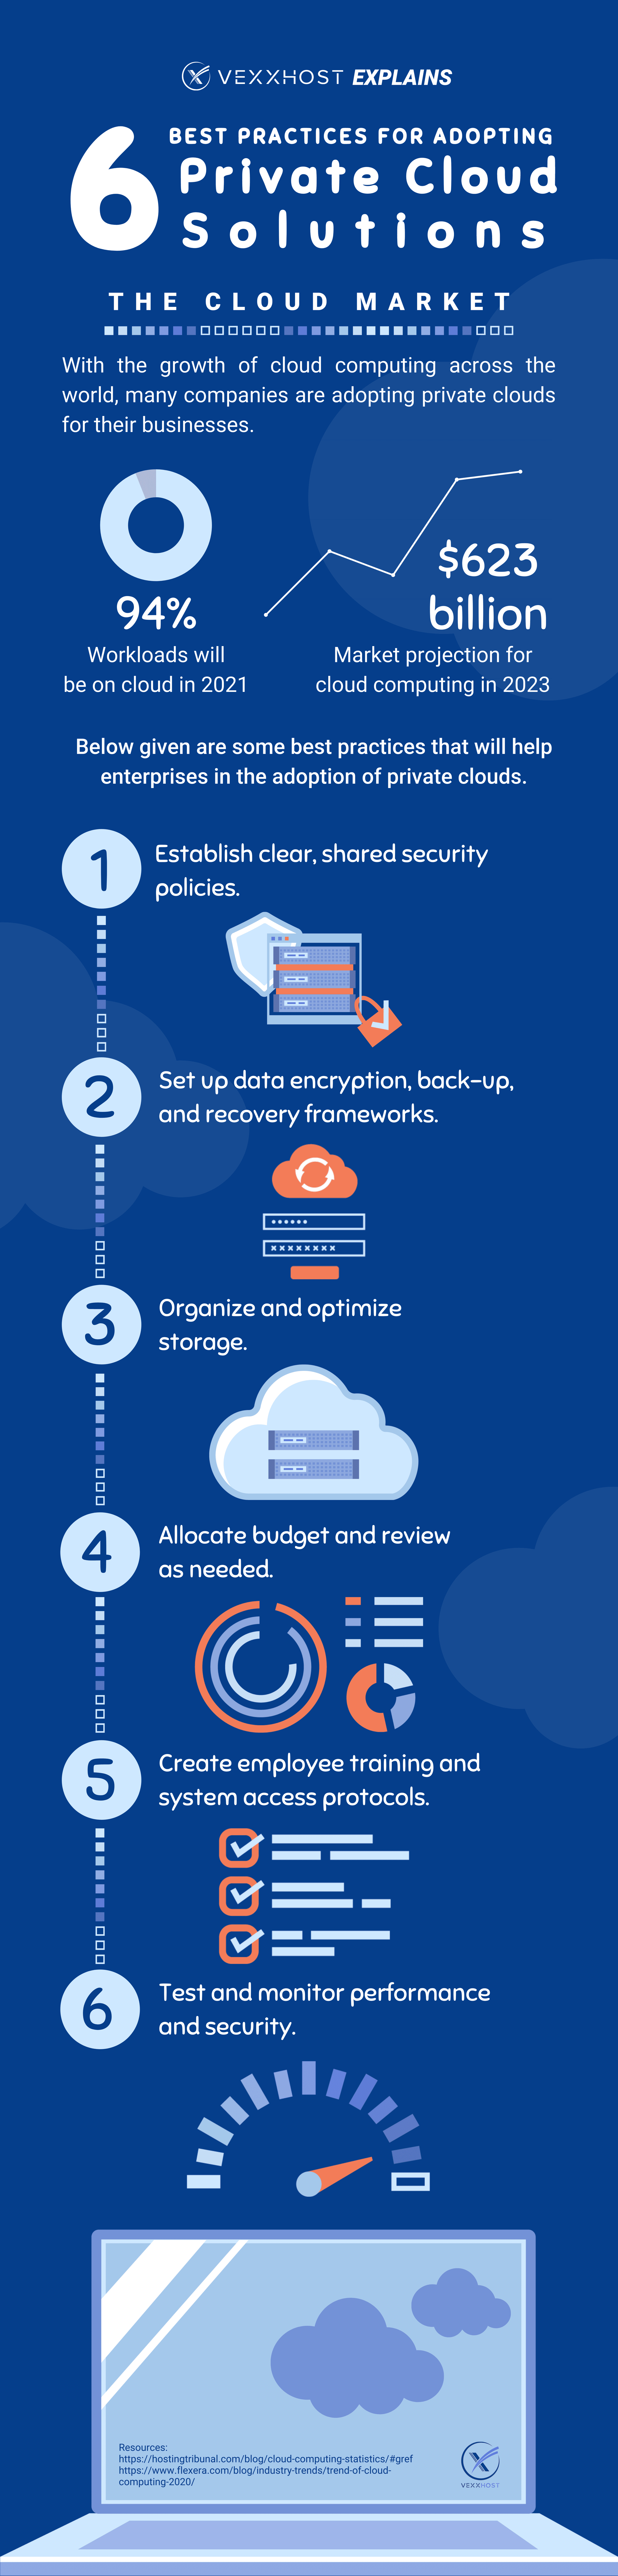 6 Best Practices for Adopting Private Cloud Solutions